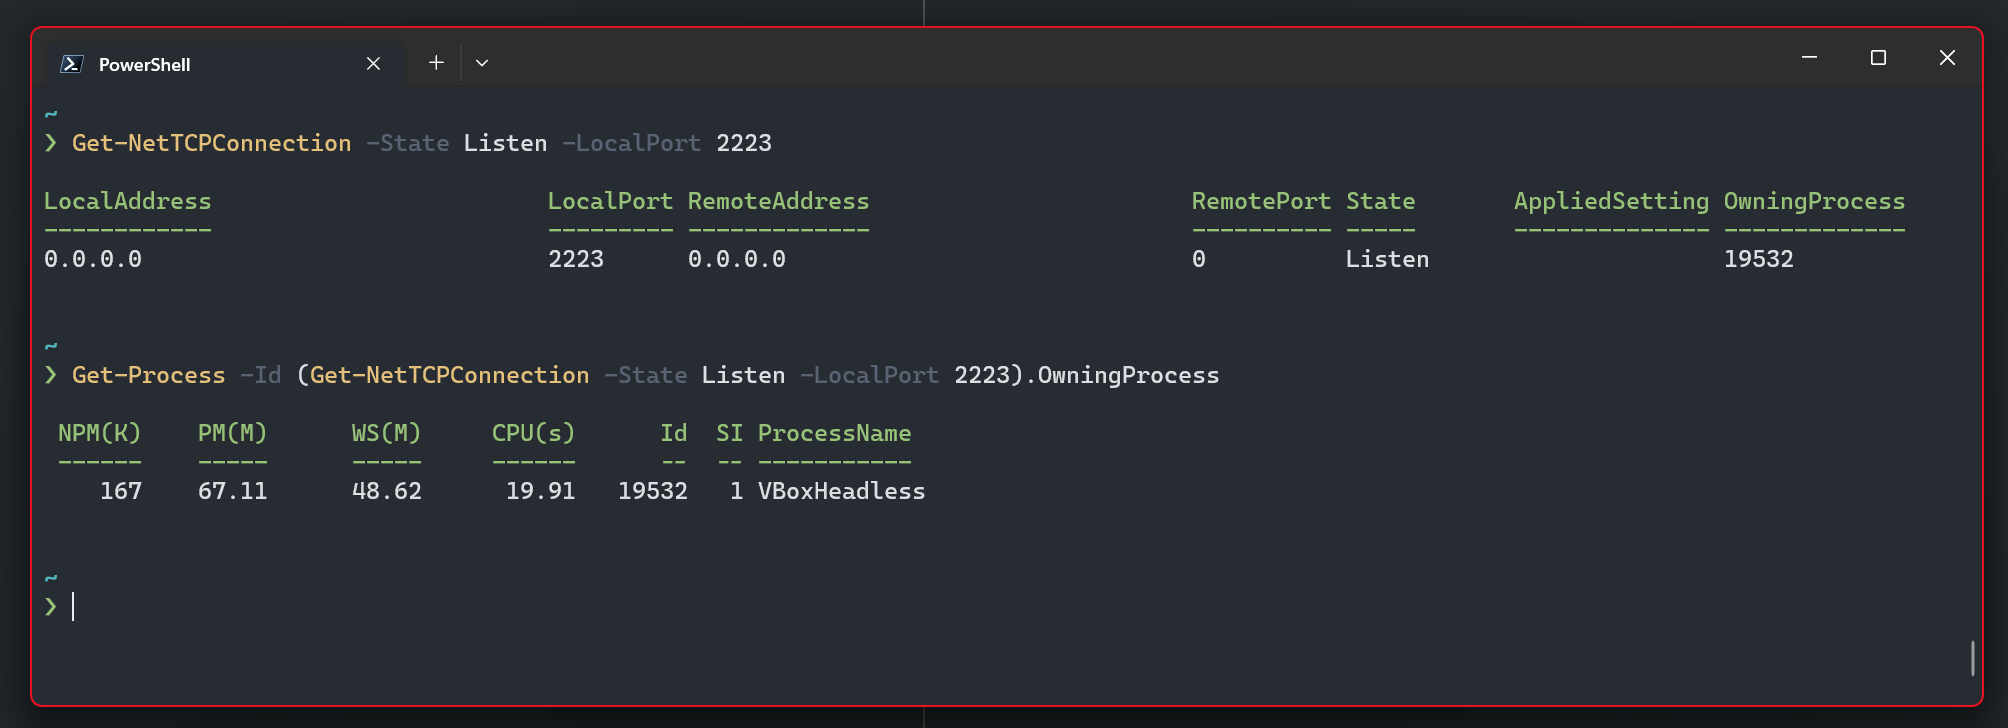 Get-NetTCPConnection -State Listen -LocalPort 2223 and Get-Process -Id (previous command).OwningProcess show that VBoxHeadless is listening on port 2223 on address 0.0.0.0